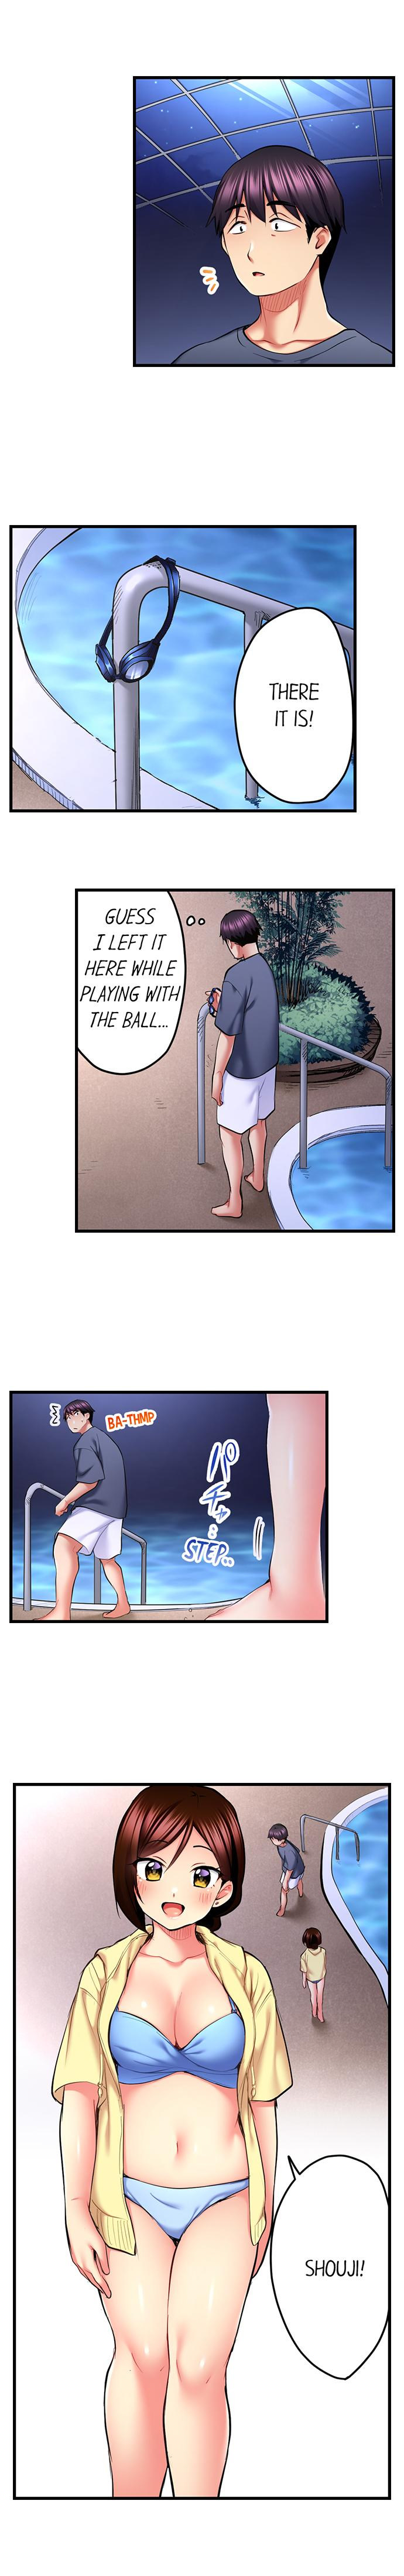 Even an Innocent TV Show Singer Needs Sex… - Chapter 48 Page 3